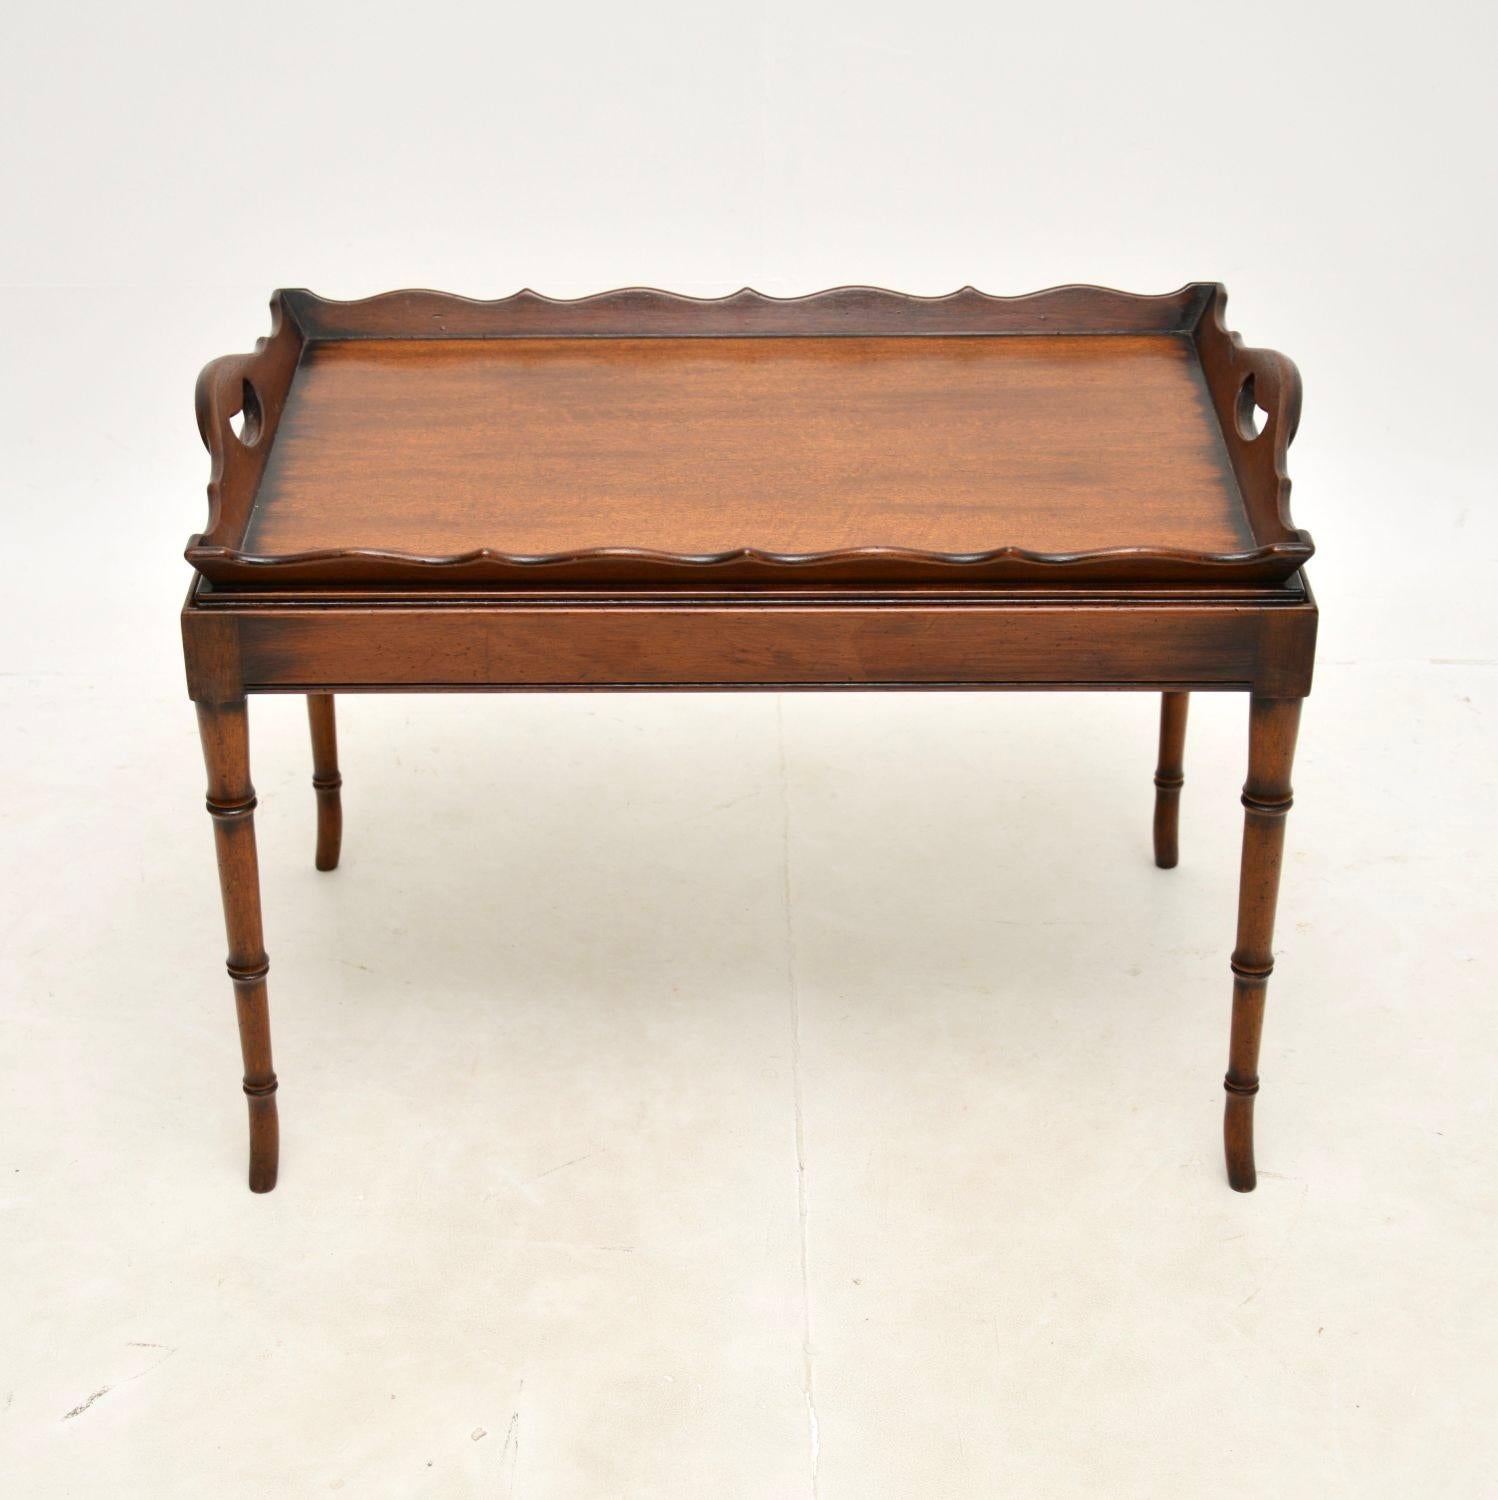 A smart and beautifully designed antique tray top coffee table. This was made in England, it dates from around the 1930’s.

The quality is fantastic, the top has a raised pie crust edge with built in handles, it lifts right off the base to be used